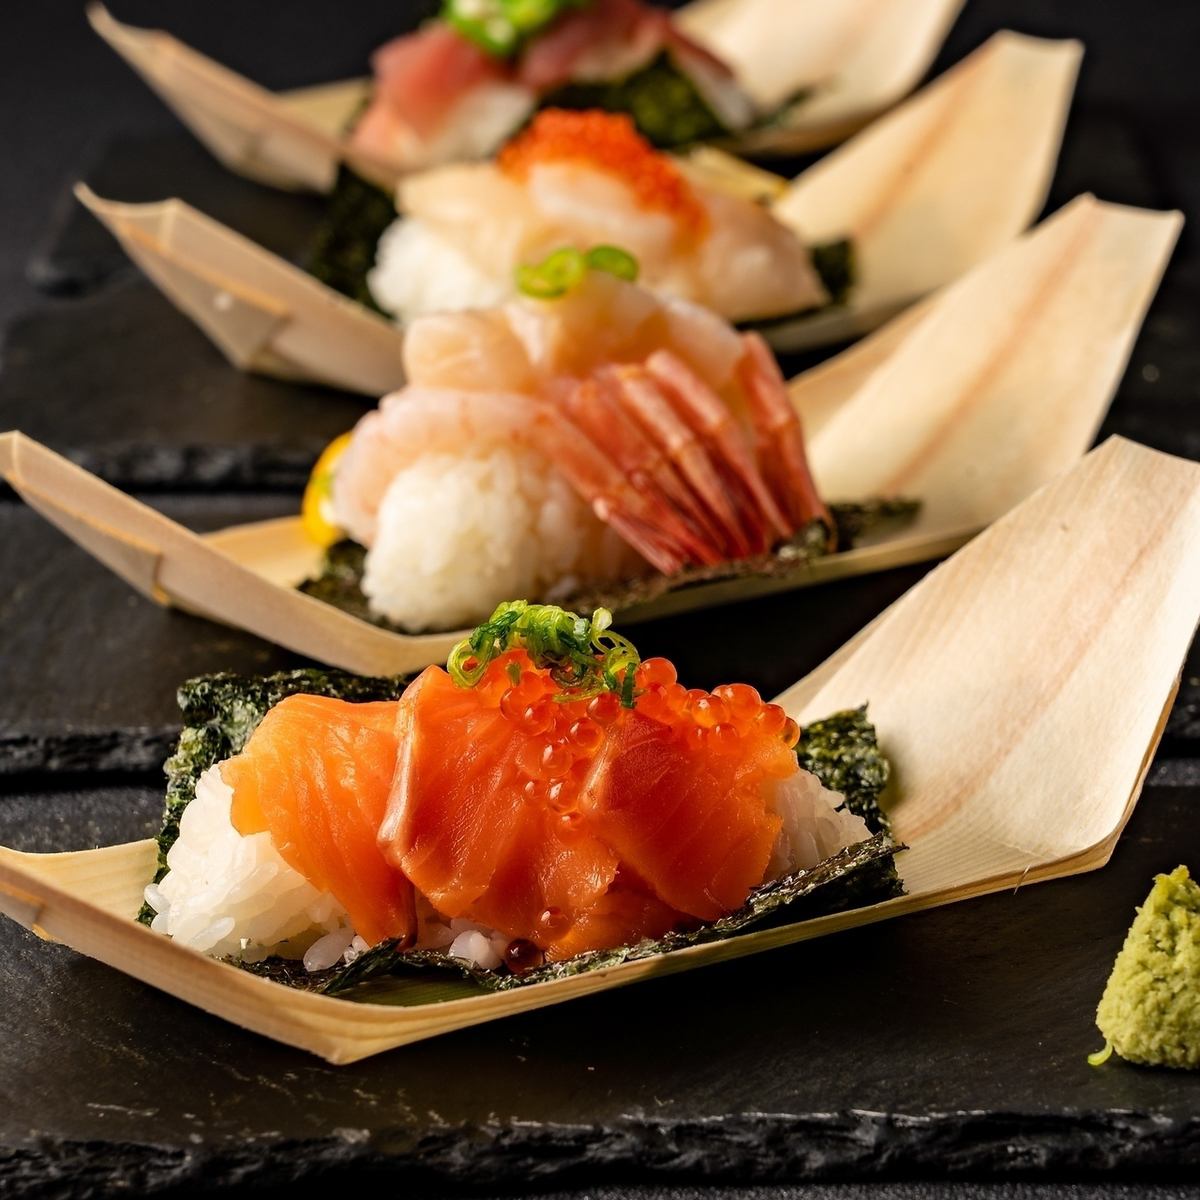 Within 1 minute walk from Susukino Station★We offer a variety of sashimi, sushi, seafood dogs, and more!